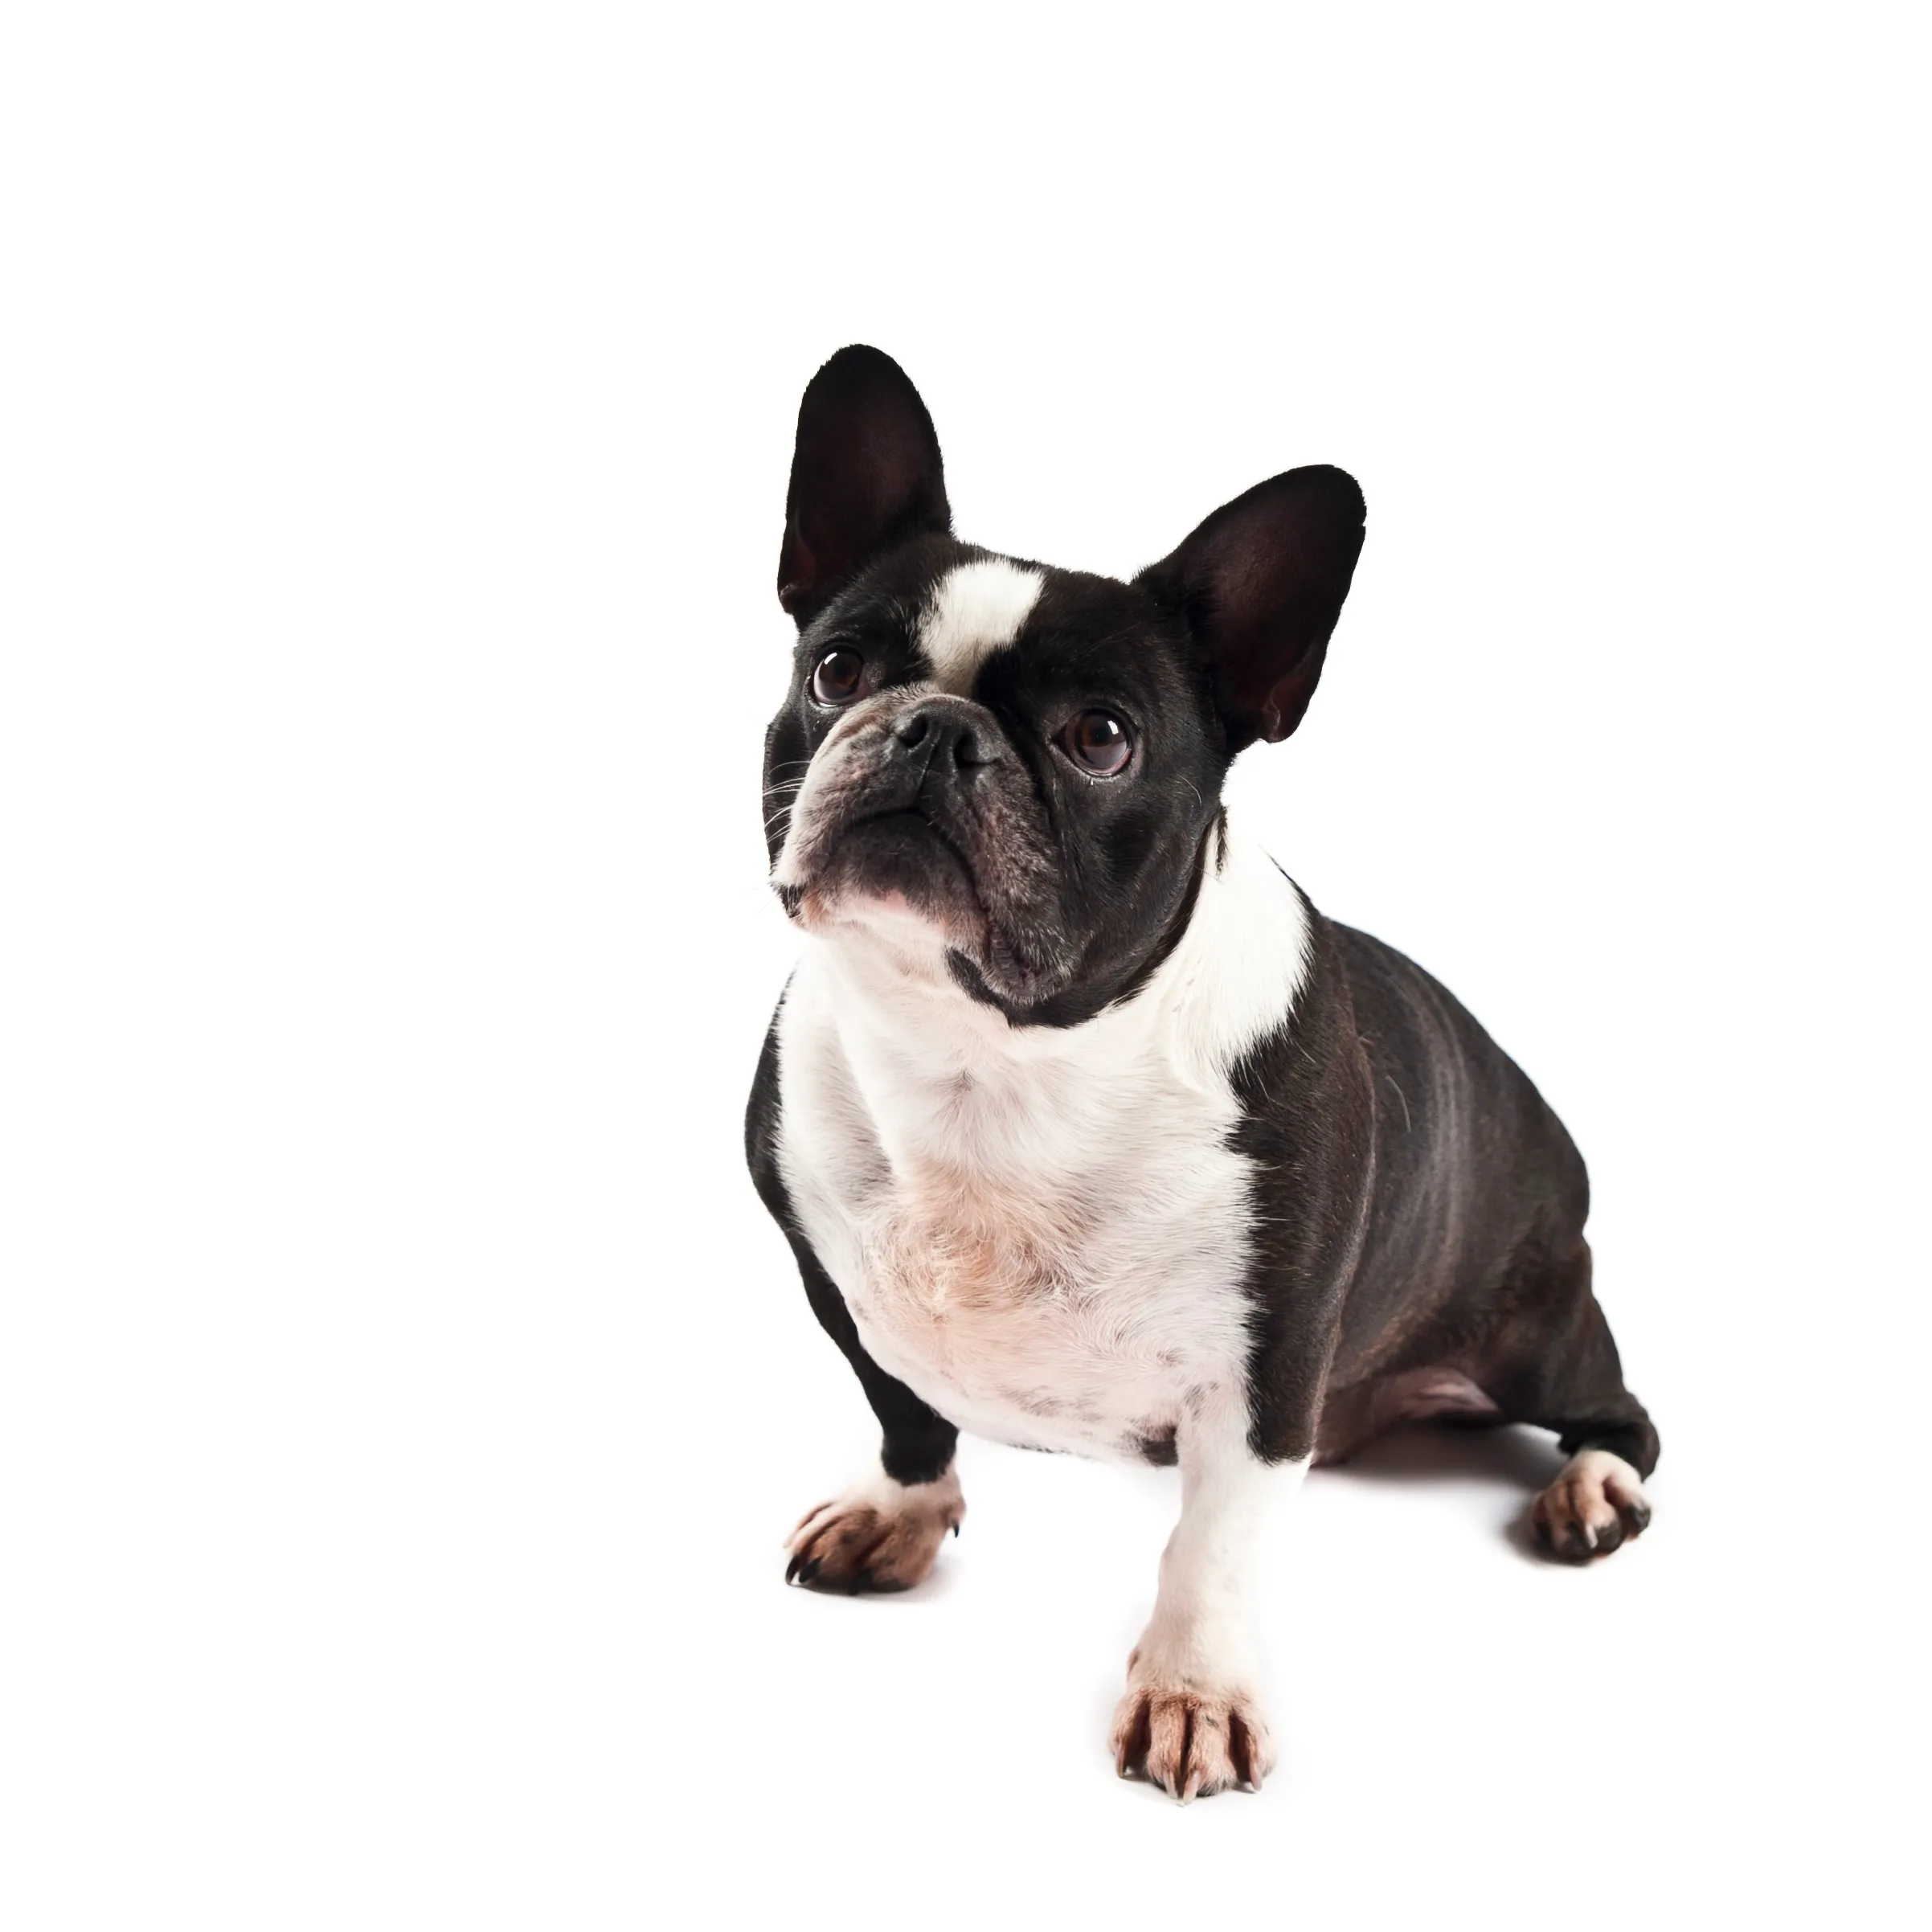 Frenchton Mixed Dog Breed Pictures, & Facts